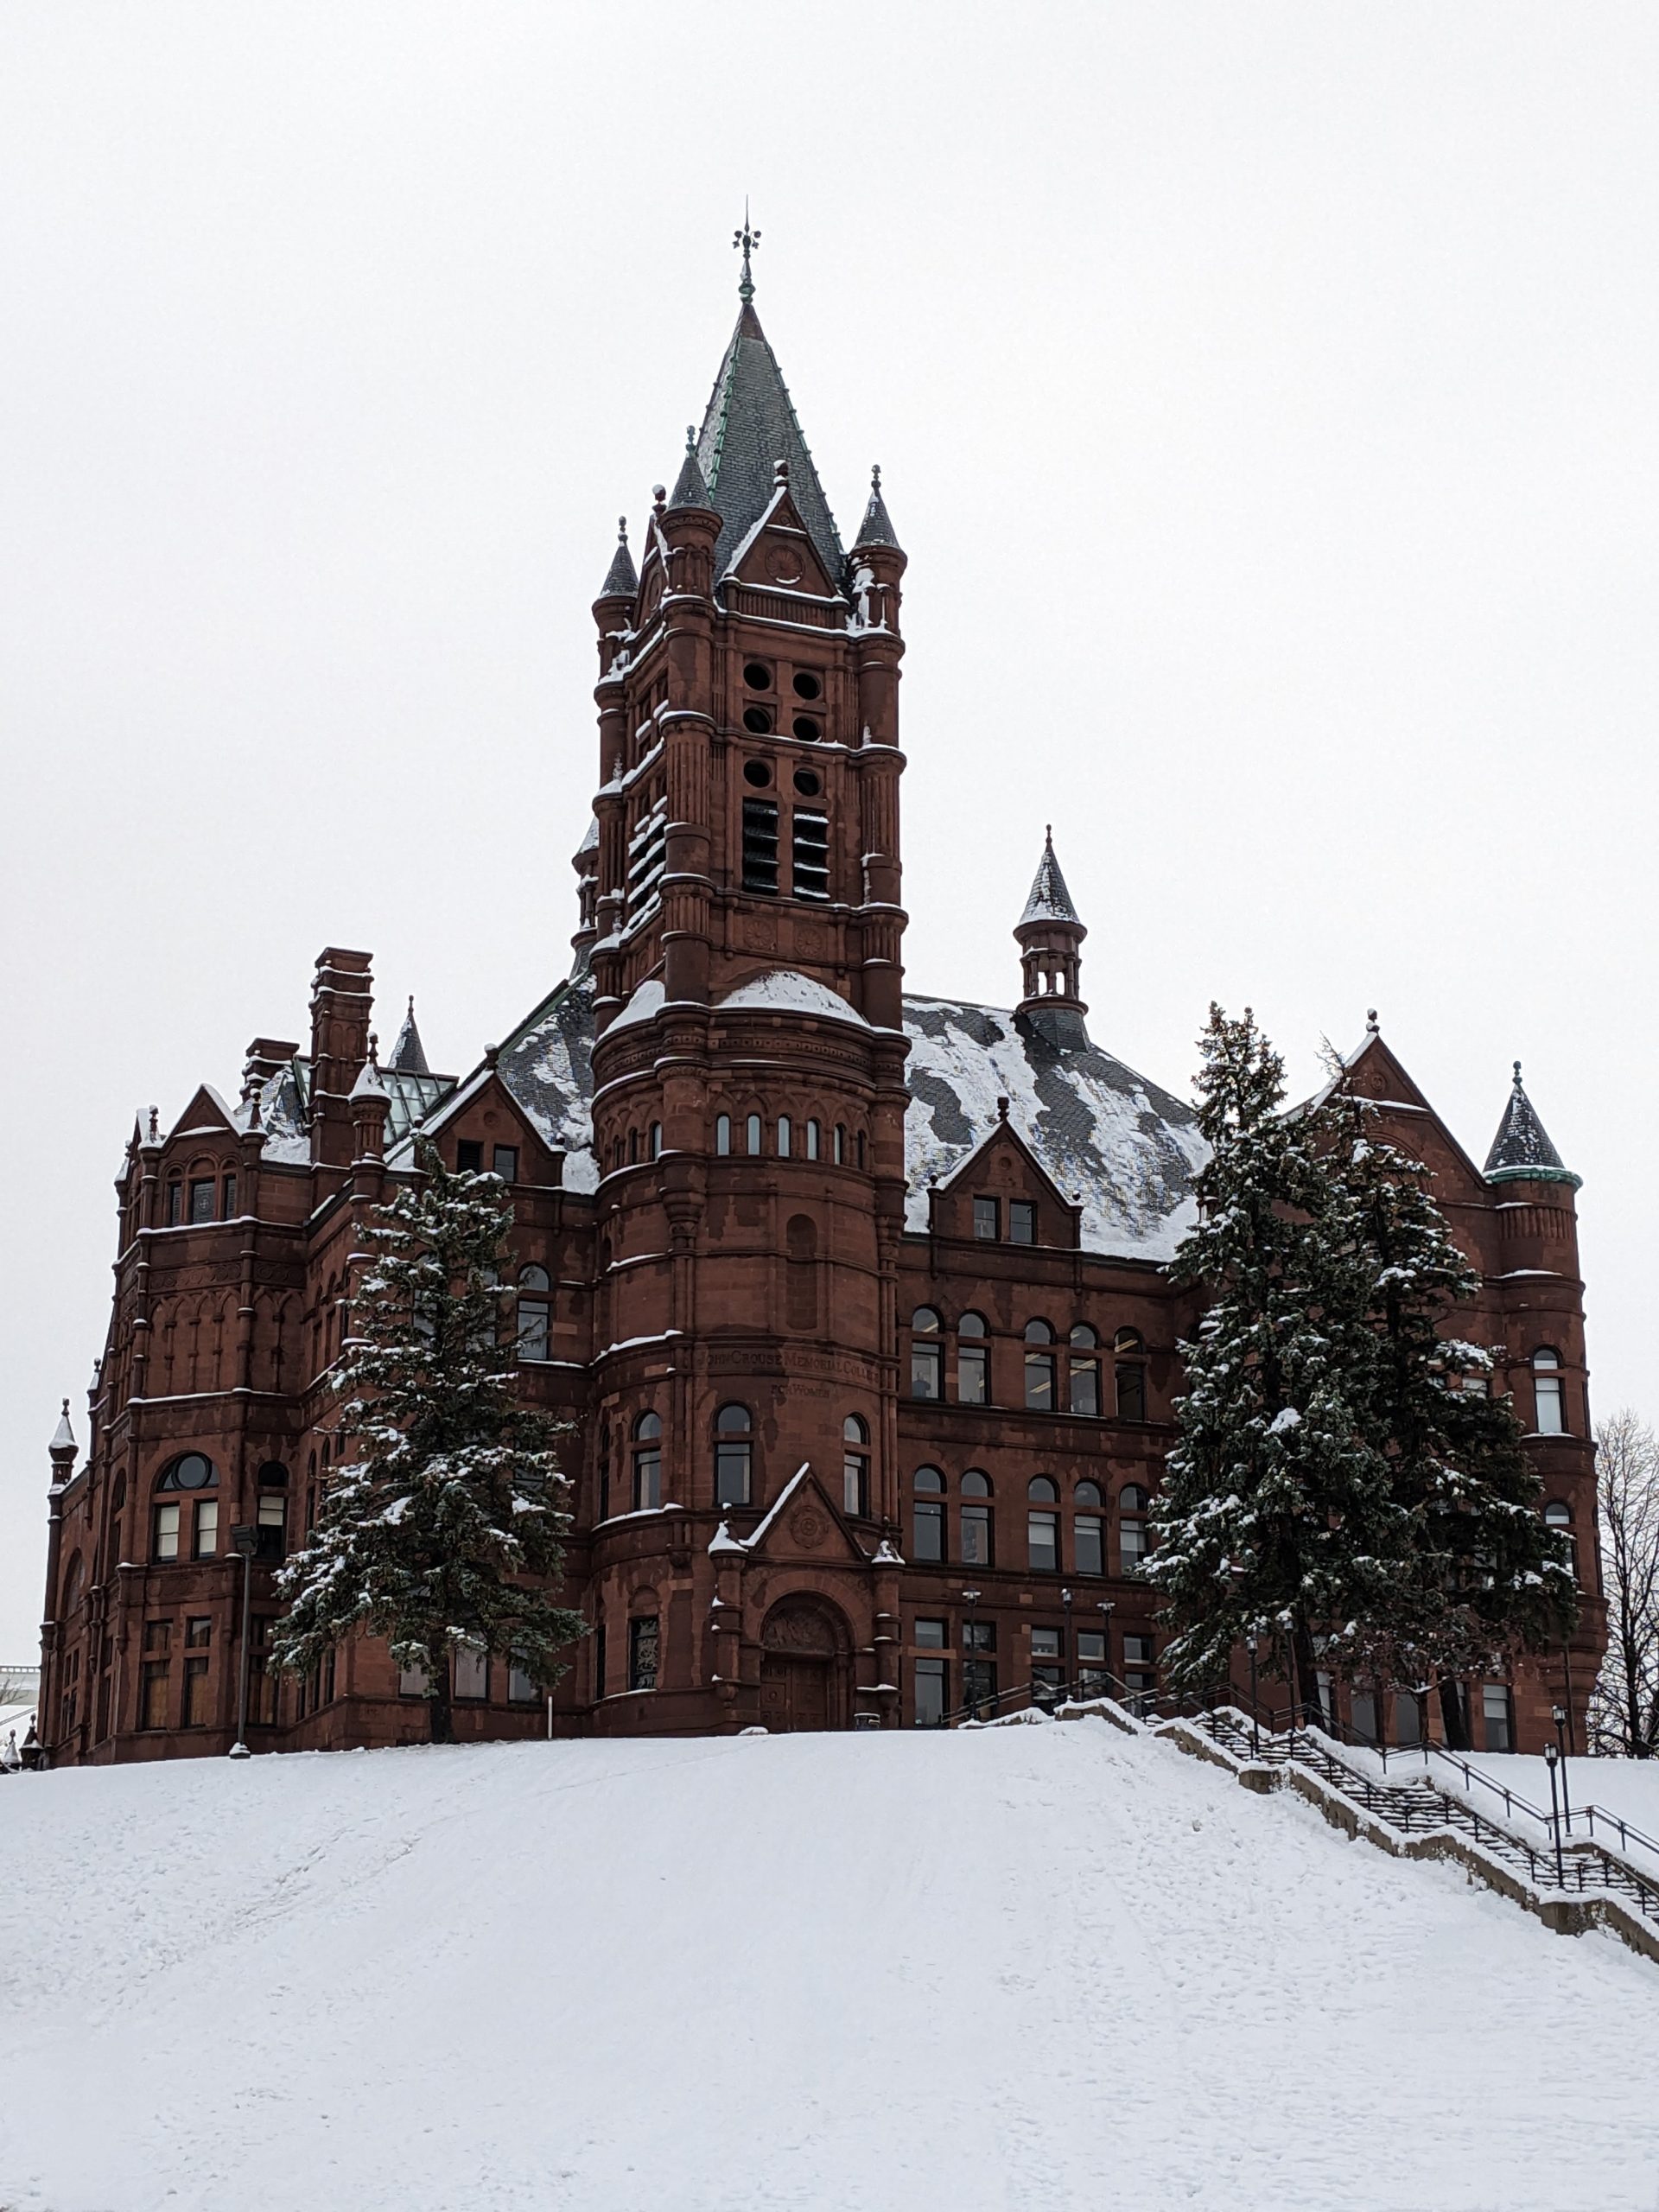 Crouse College covered in snow